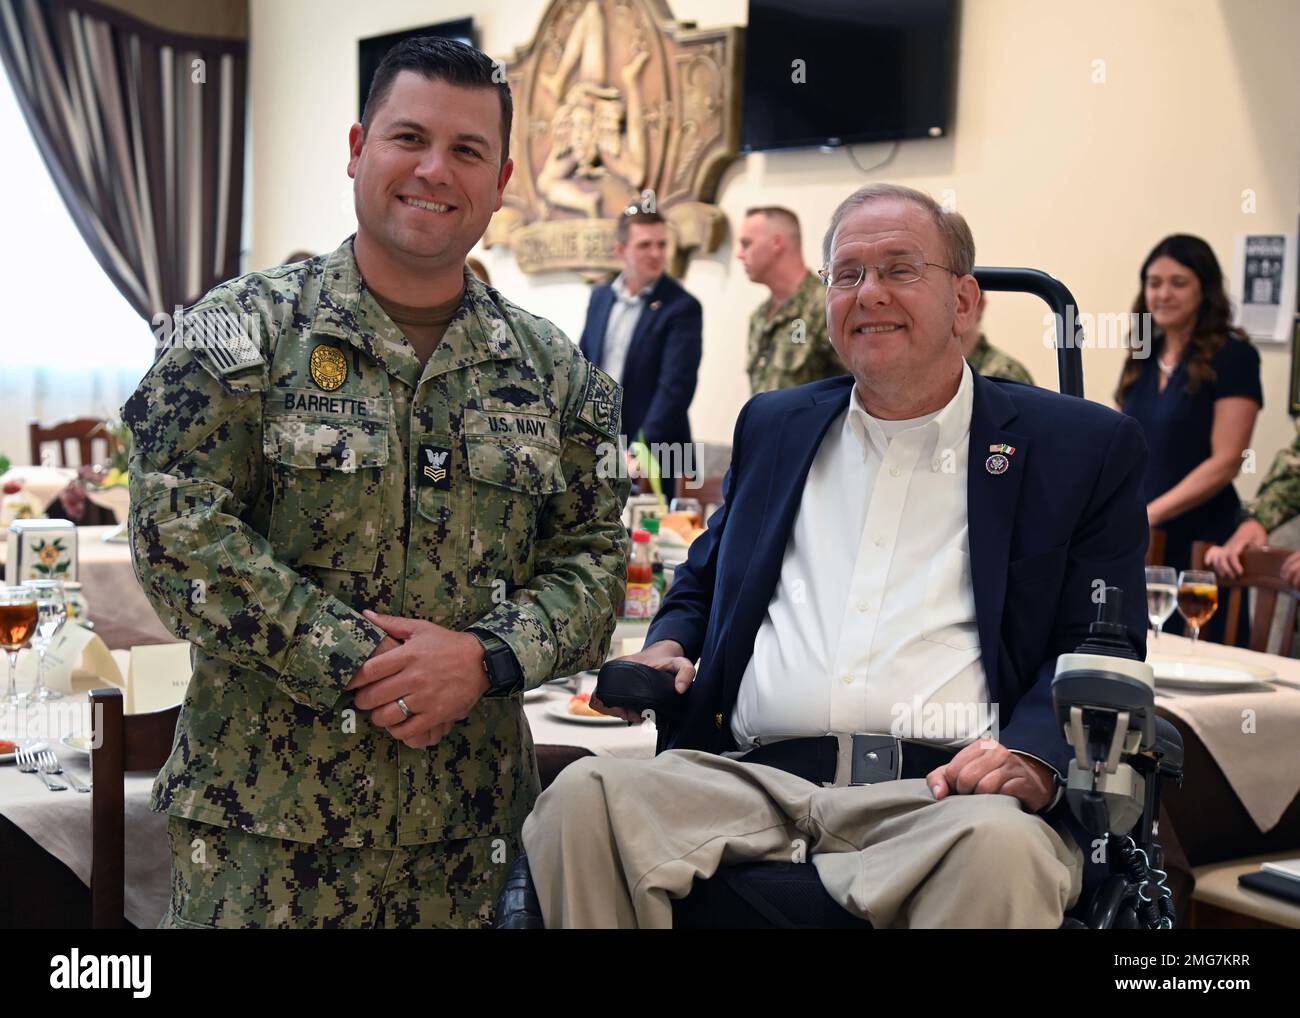 220822-N-OX321-1133 NAVAL AIR STATION SIGONELLA, Italy (Aug. 22, 2022)-- U.S. Rep. Jim Langevin (D-RI), right, takes a photo with Master-at-Arms 1st Class Stephen Barrette, from Woonsocket, Rhode Island, before lunch at the Ristorante Bella Etna galley during the House Armed Services Committee delegation visit to Naval Air Station Sigonella, Aug. 22, 2022. NAS Sigonella’s strategic location enables U.S., allied, and partner nation forces to deploy and respond as required to ensure security and stability in Europe, Africa and Central Command. Stock Photo